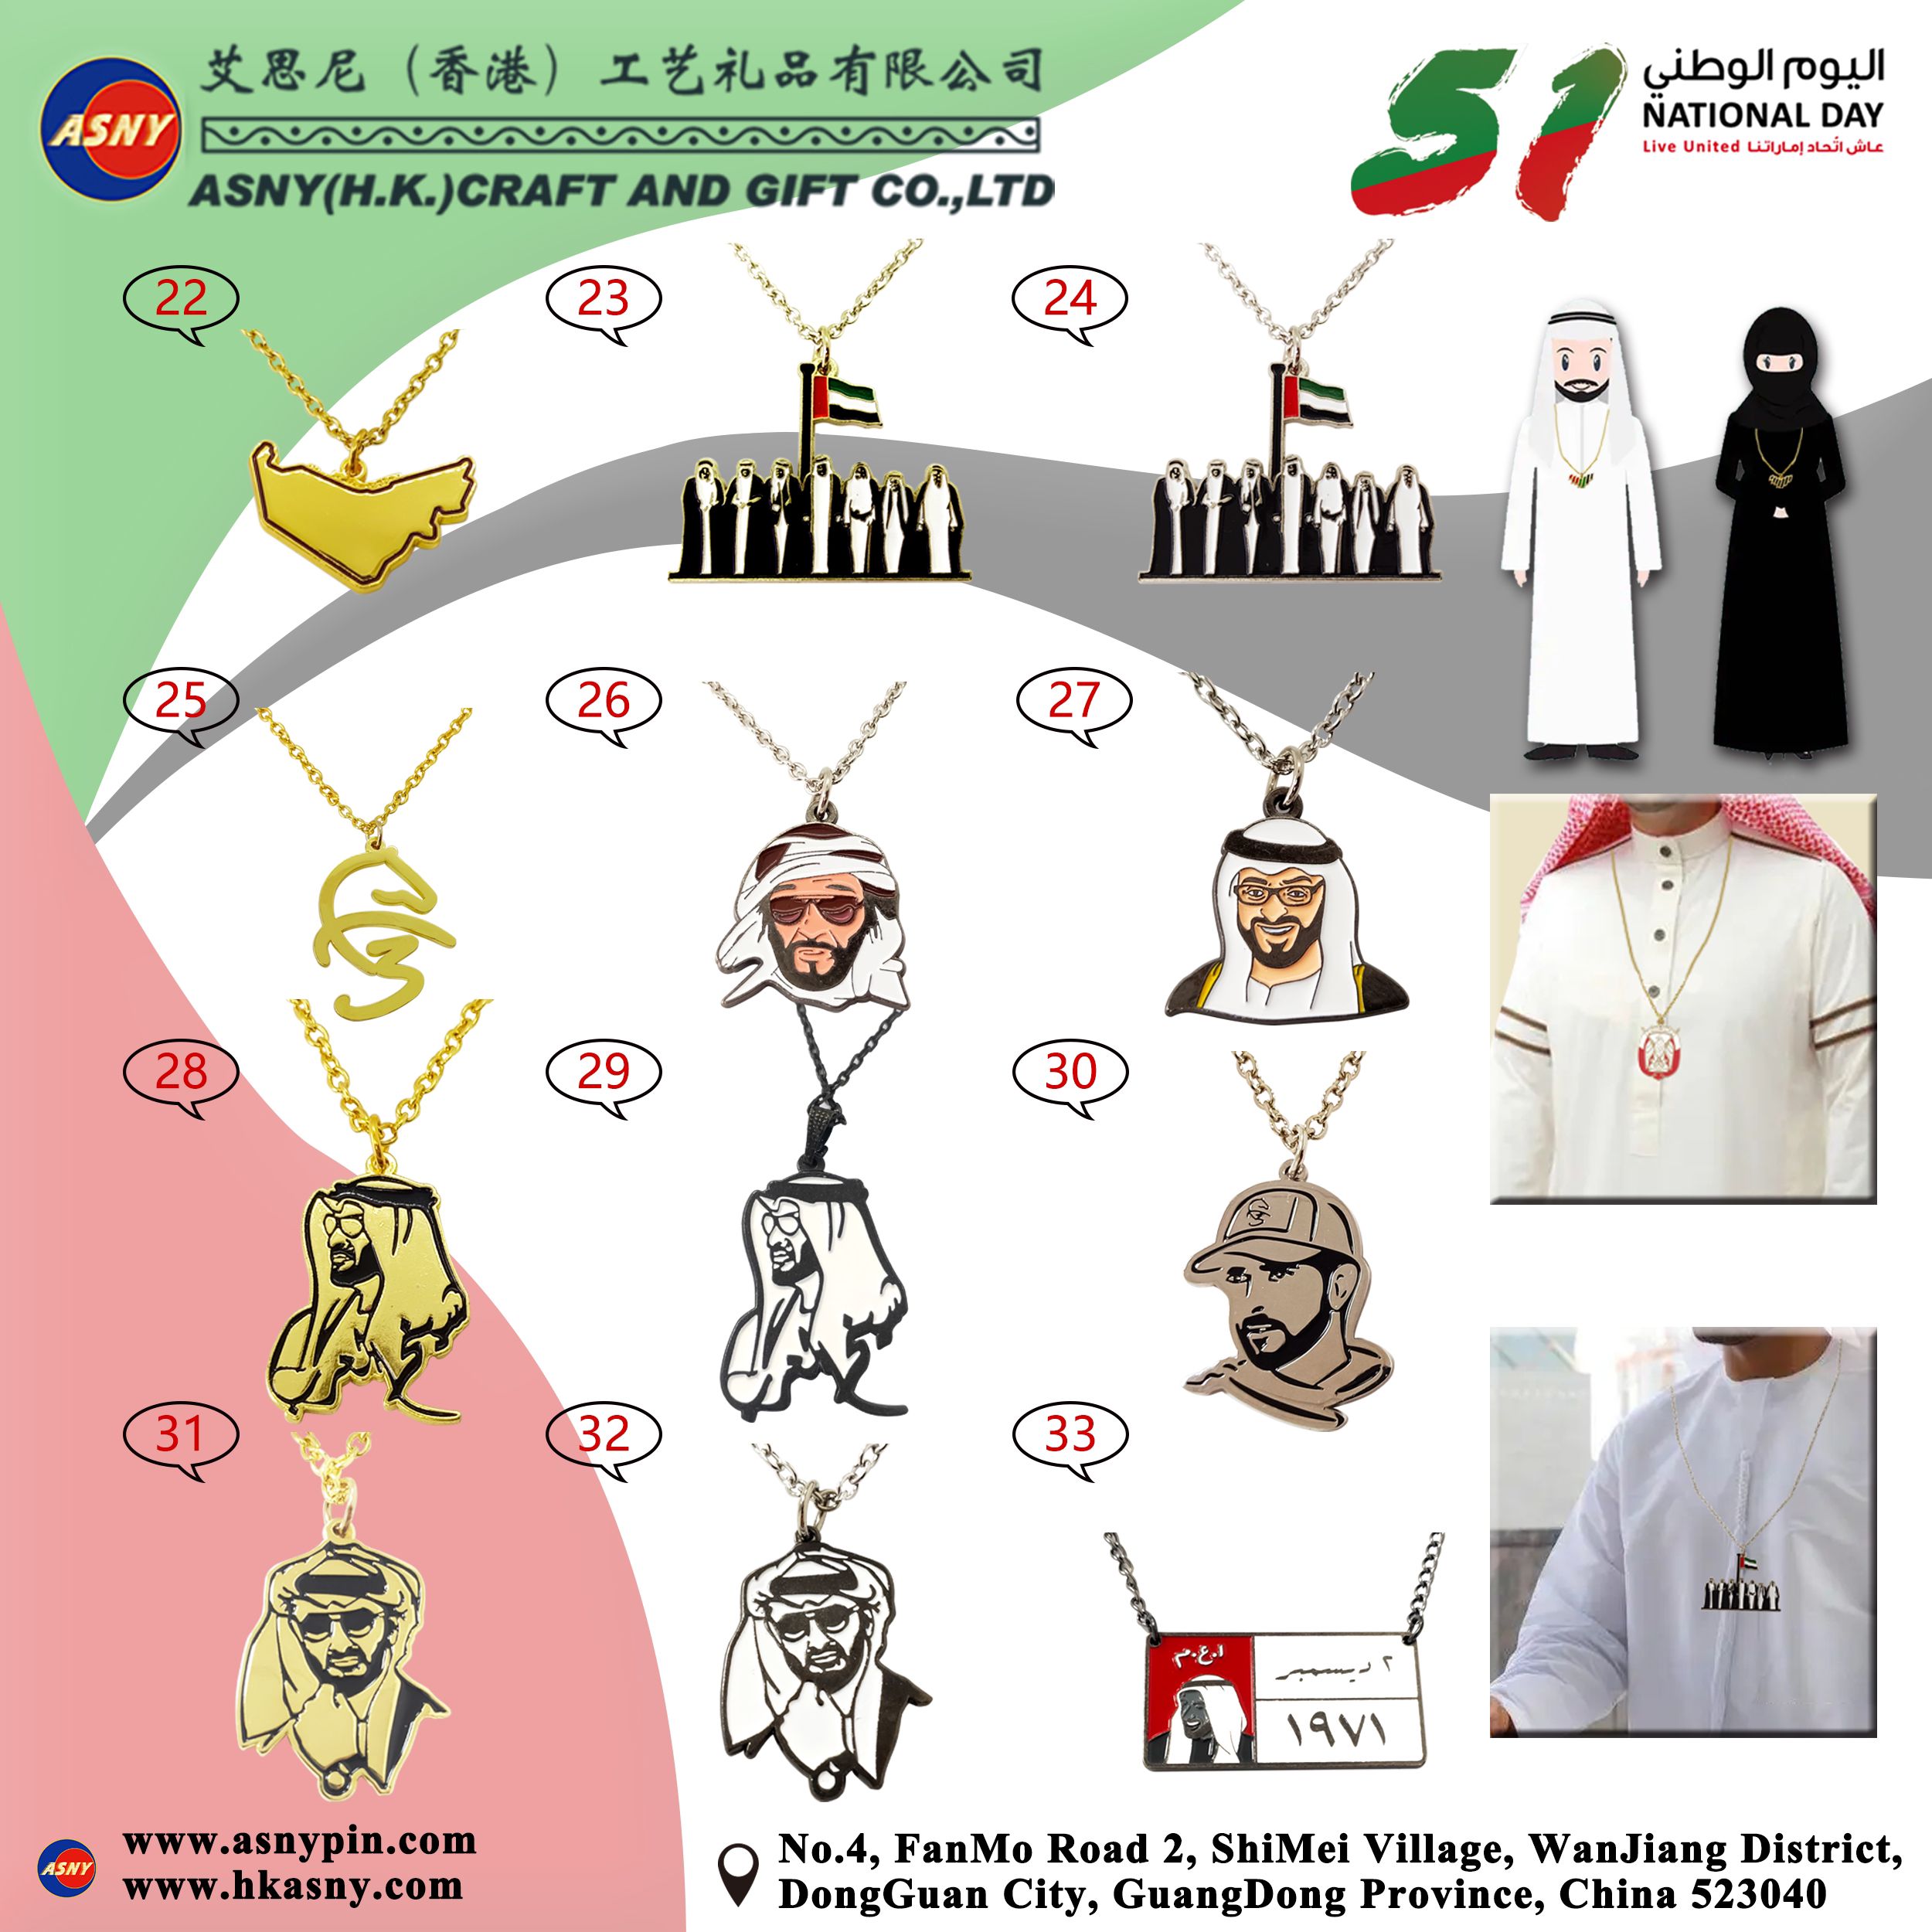 Product Catalog - UAE 51st National Day Collection (6)